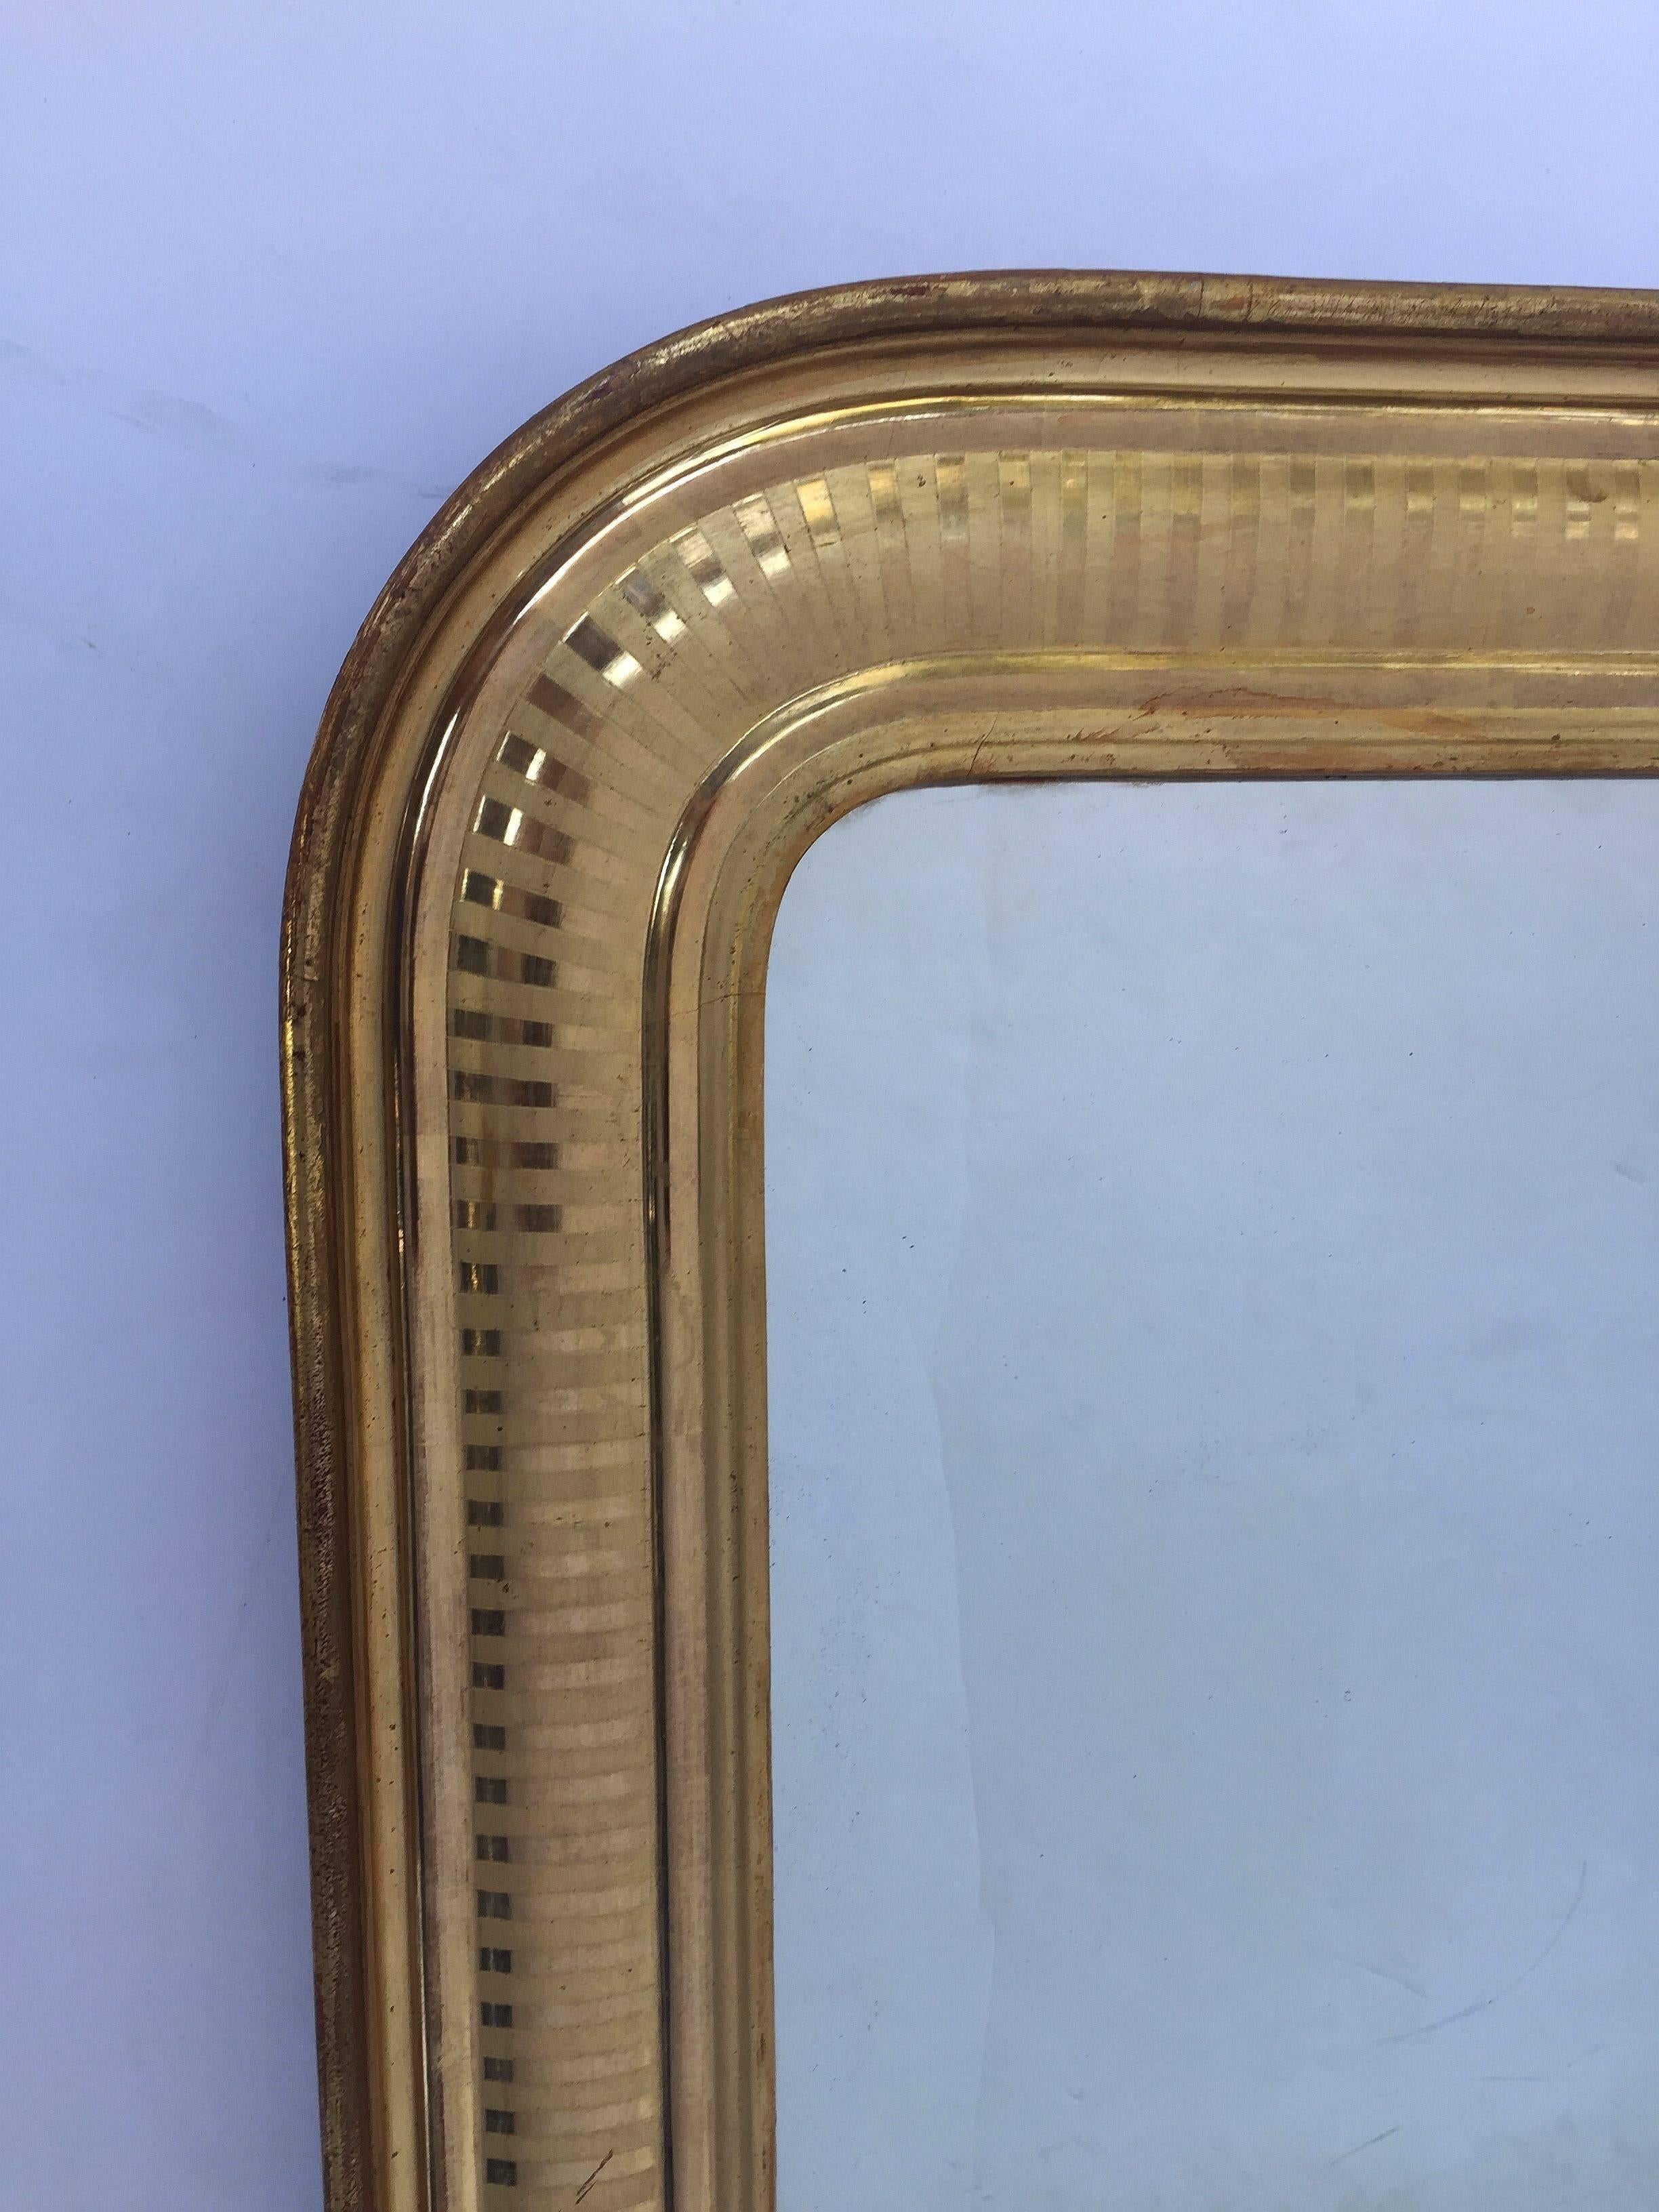 A handsome large Louis Philippe gilt wall mirror featuring a moulded surround and an etched band design showing through gold-leaf.

Dimensions: H 34 1/4